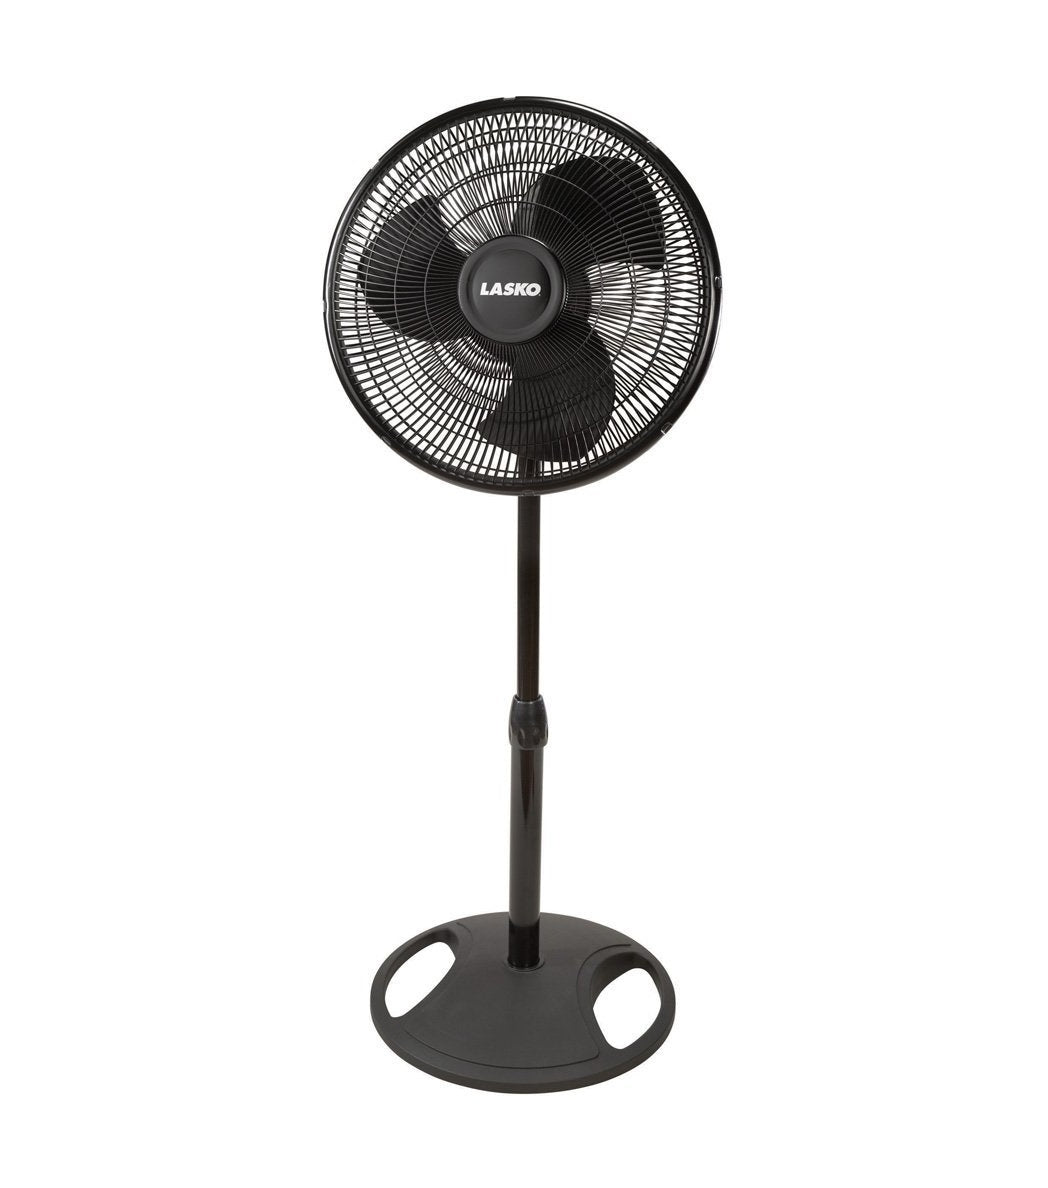 buy oscillating fans at cheap rate in bulk. wholesale & retail fans & vent kits store.